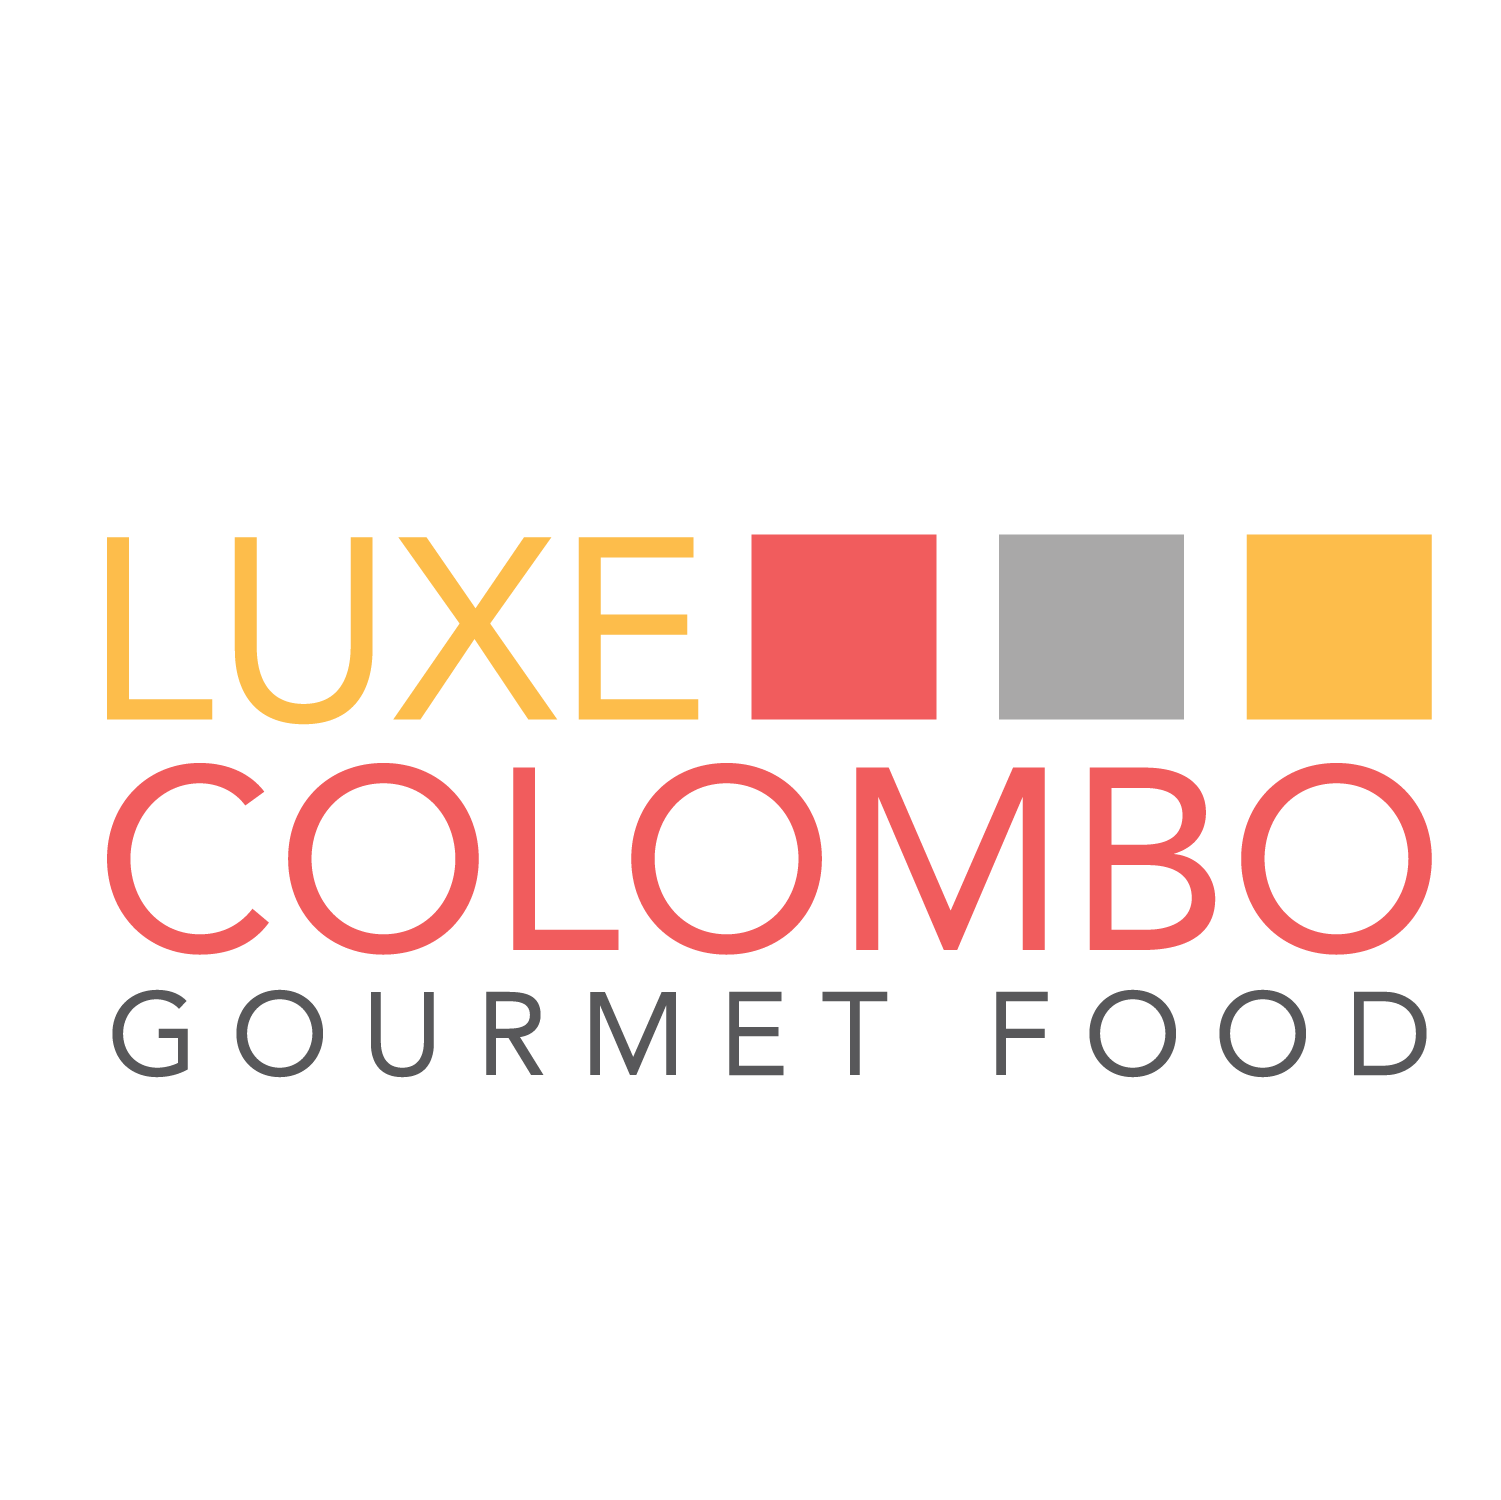 luxecolombo.com